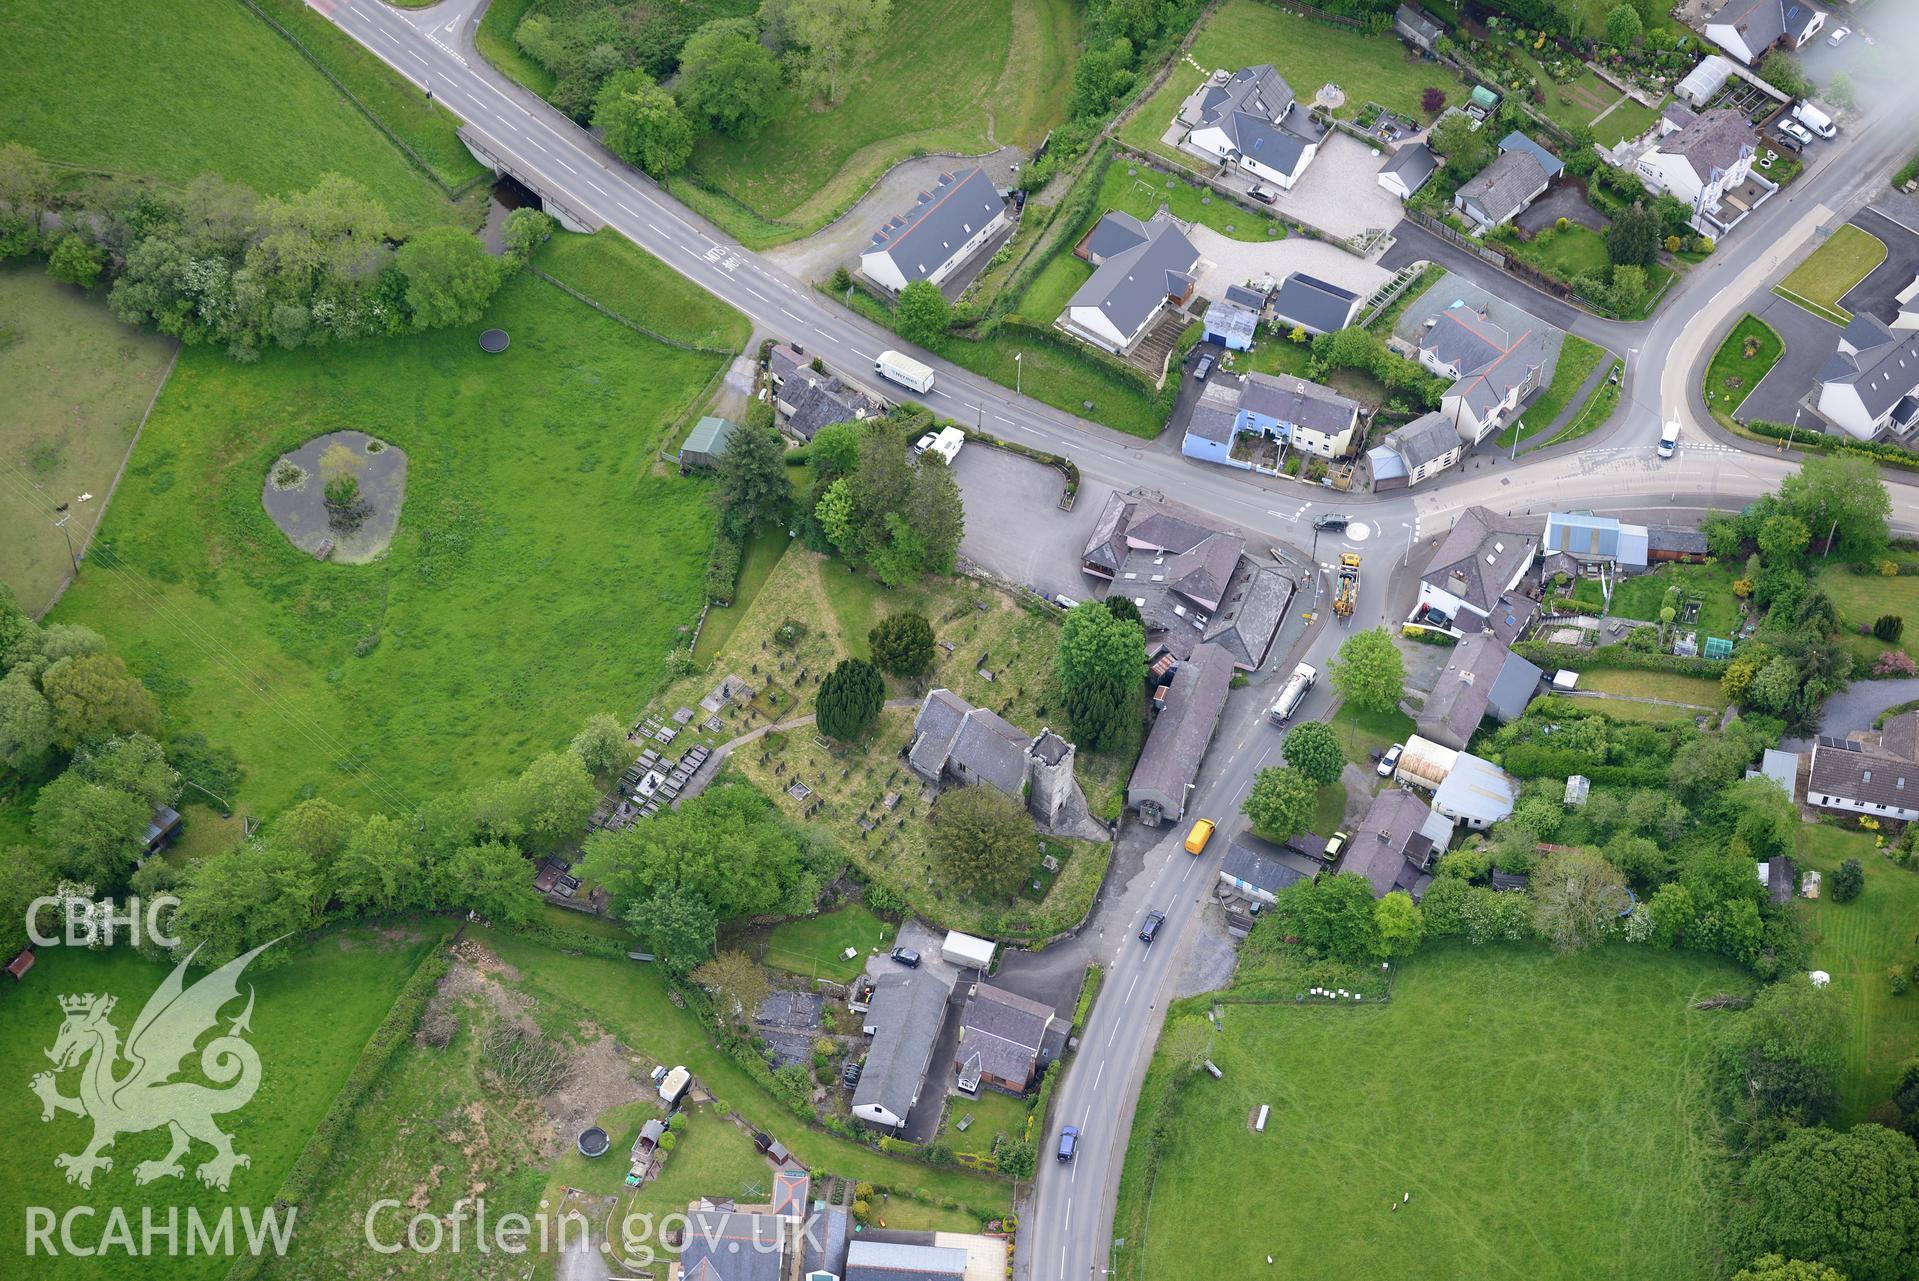 St. Gwynin's Church and Llanwnnen Village. Oblique aerial photograph taken during the Royal Commission's programme of archaeological aerial reconnaissance by Toby Driver on 3rd June 2015.